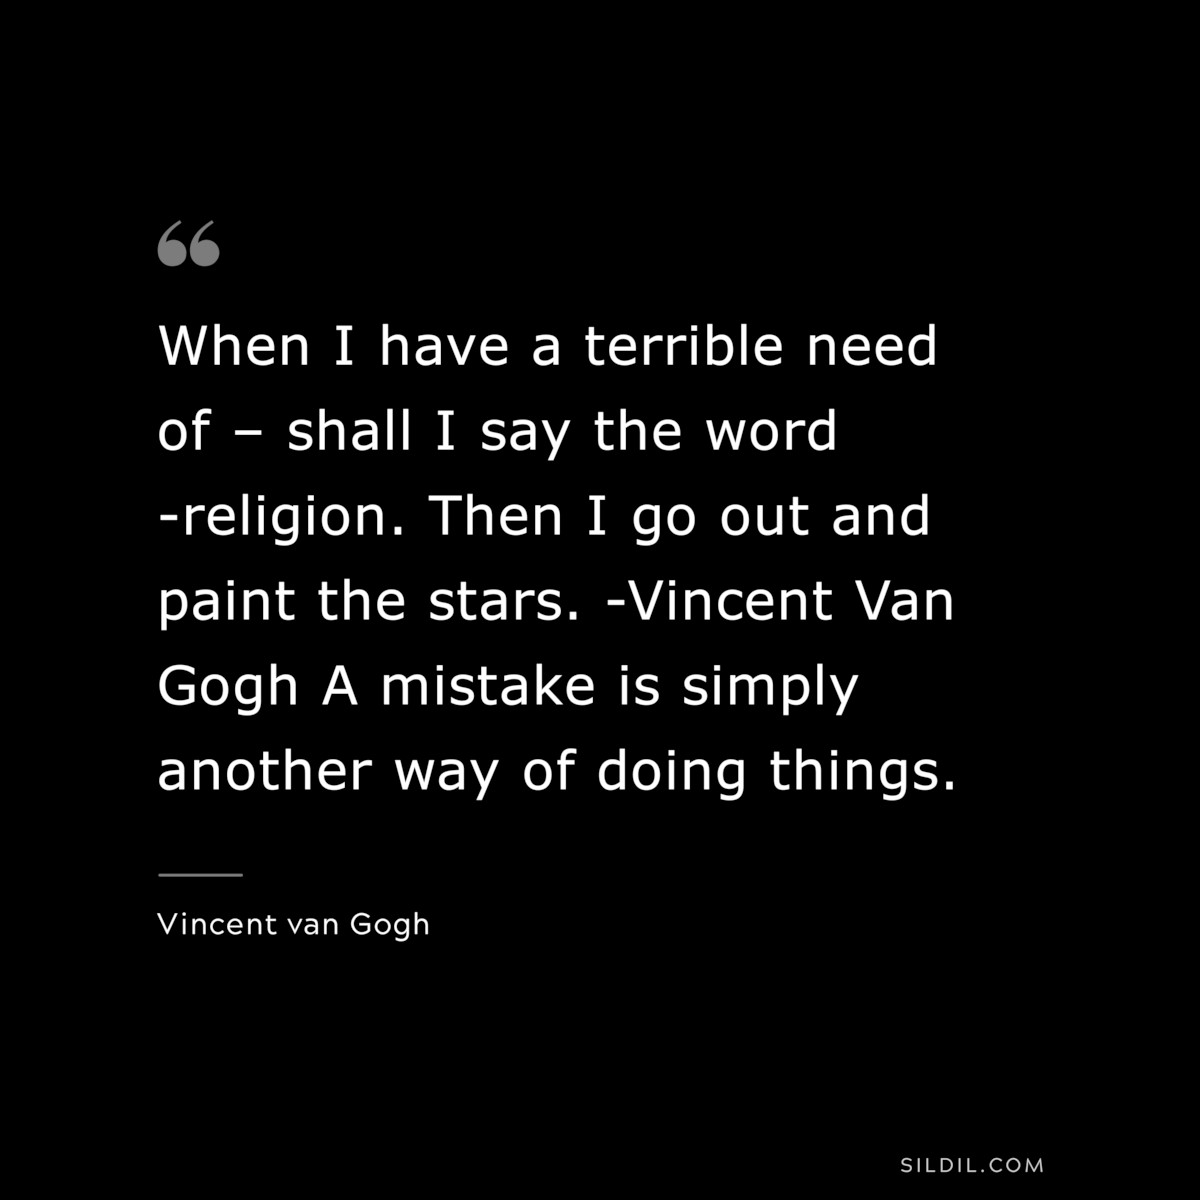 When I have a terrible need of – shall I say the word -religion. Then I go out and paint the stars. -Vincent Van Gogh A mistake is simply another way of doing things. ― Vincent van Gogh